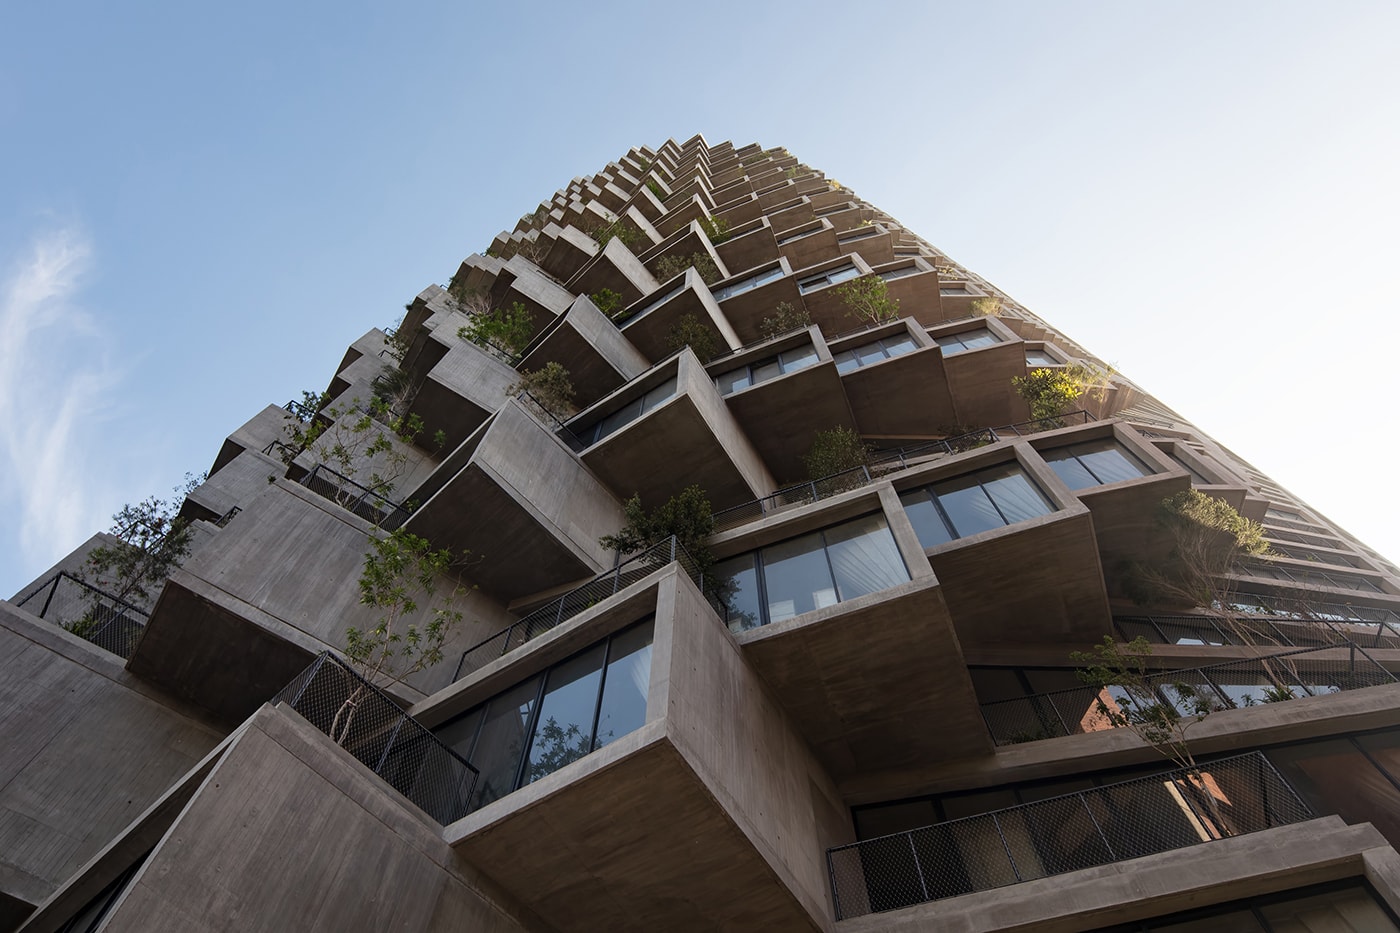 Bjarke Ingels Completes First Project in South America